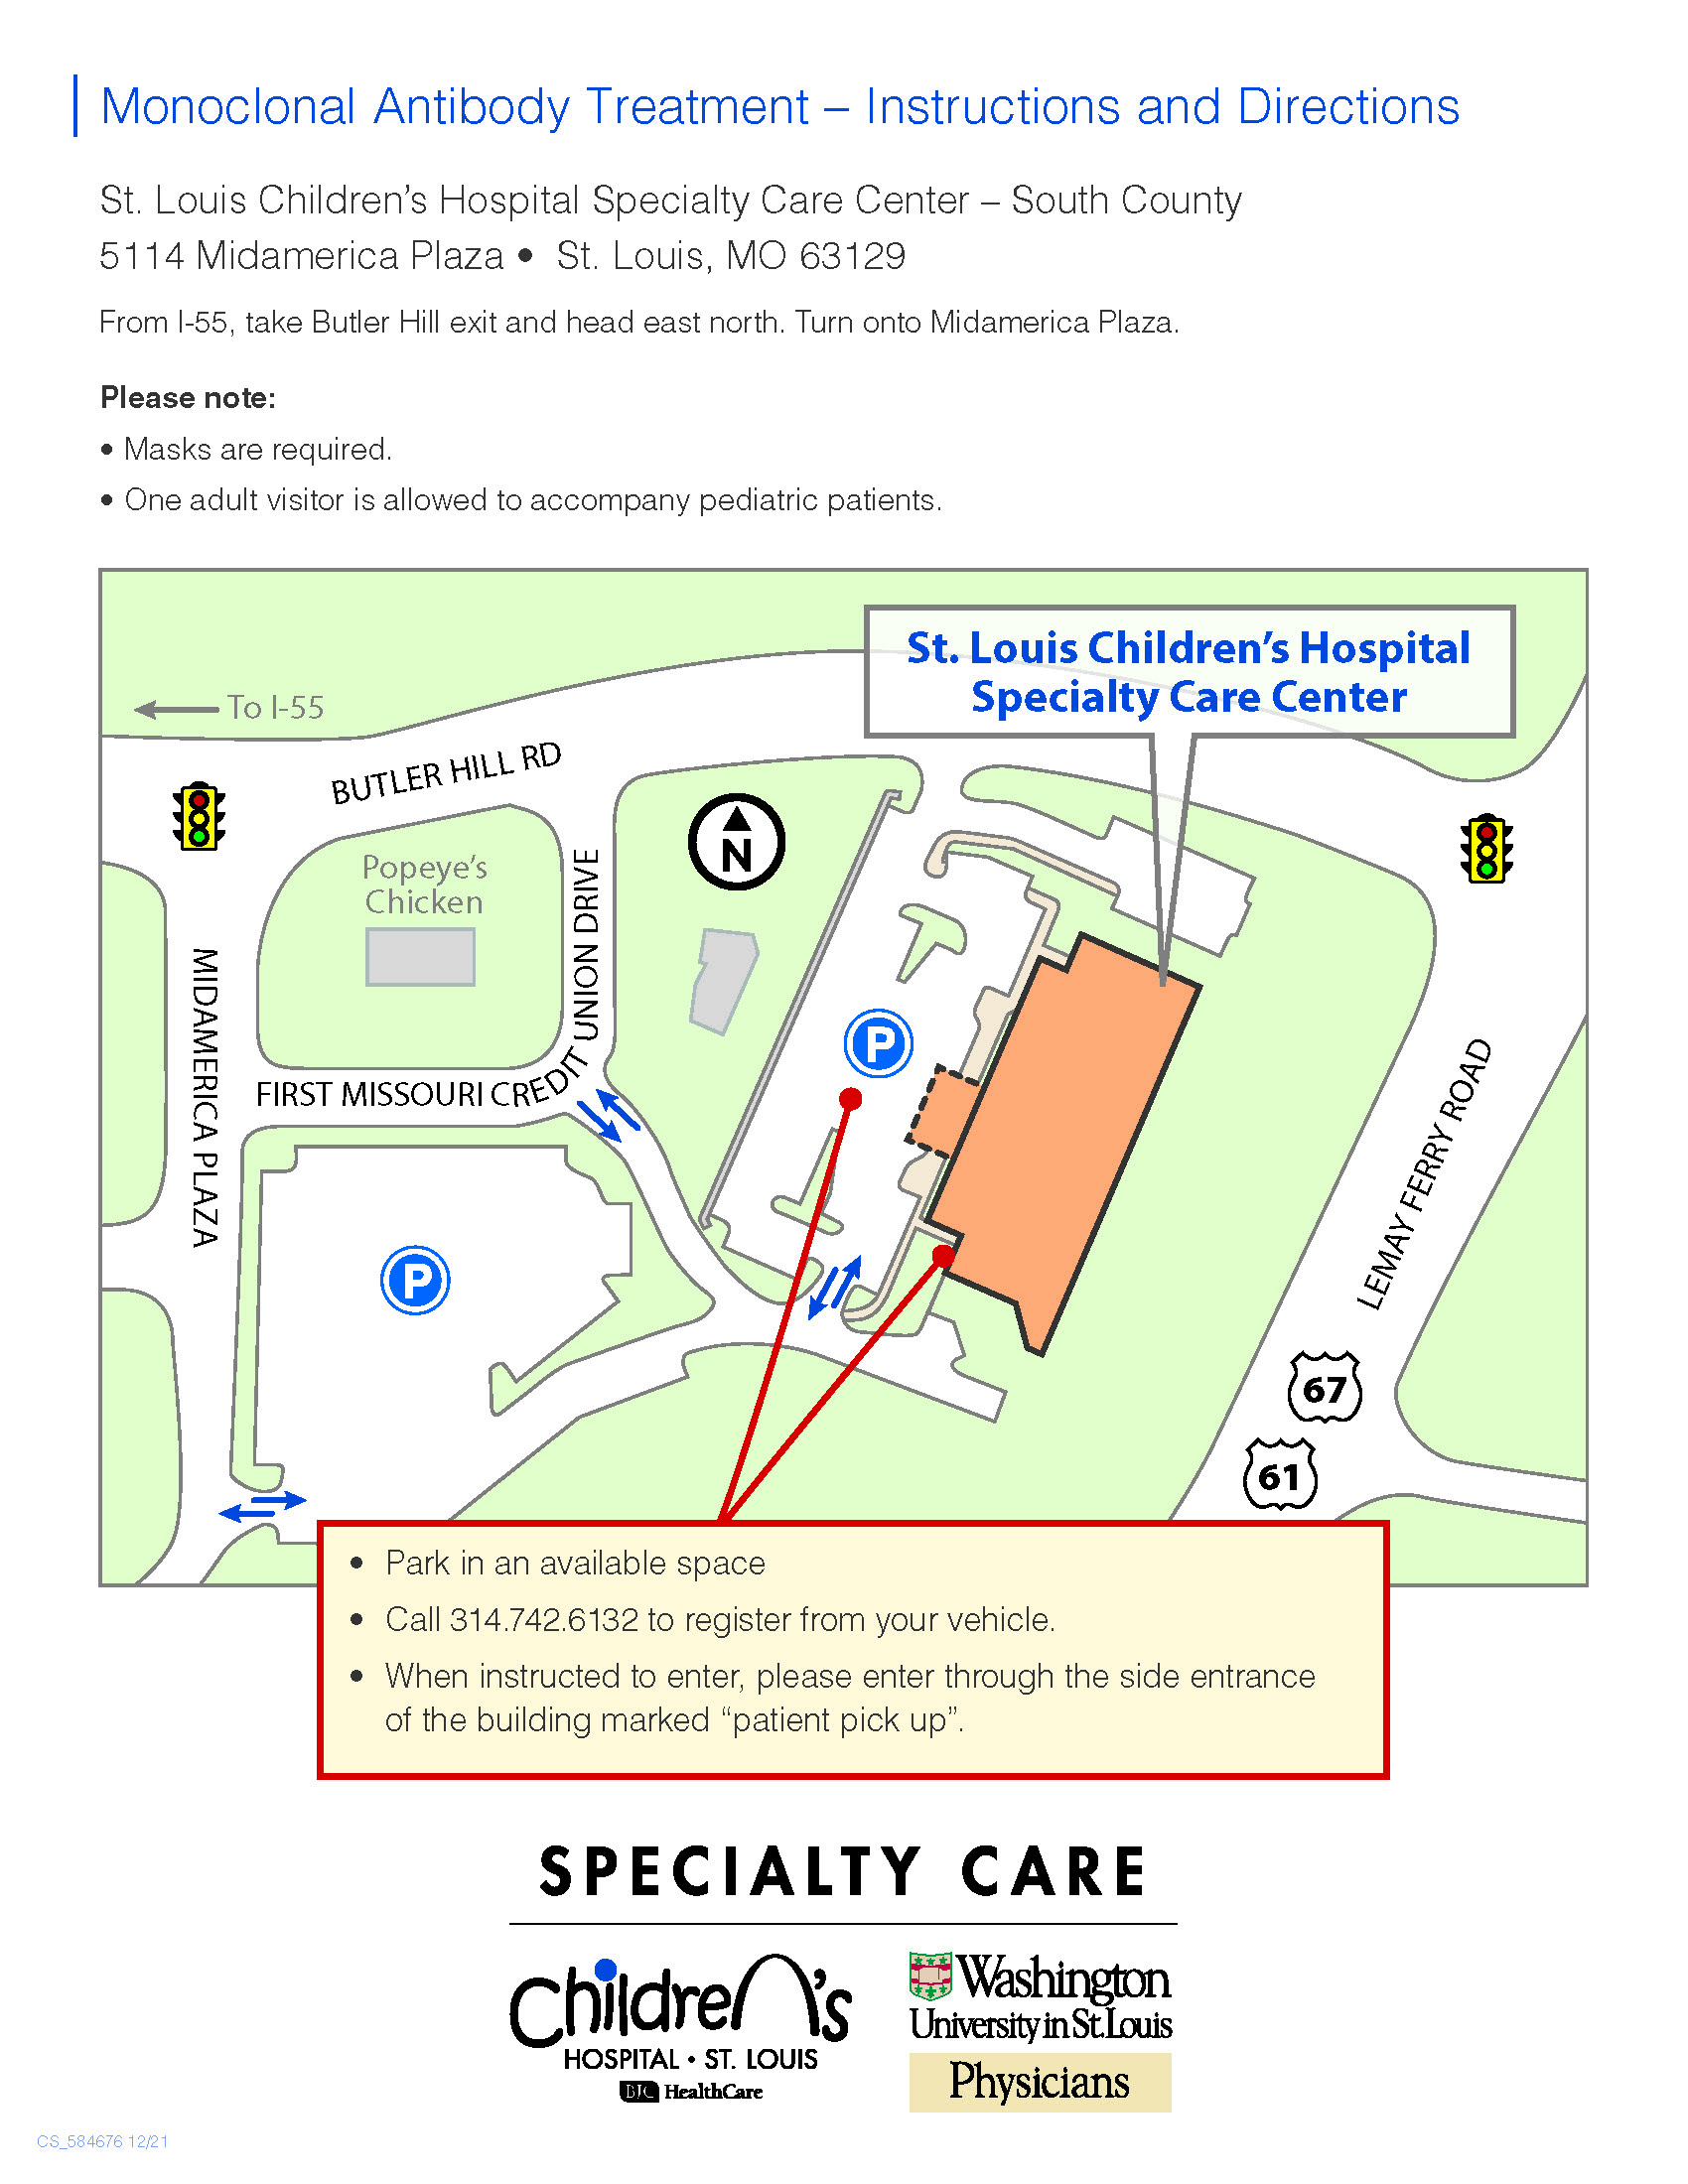 St. Louis Children's Hospital Specialty Clinic South County parking instructions